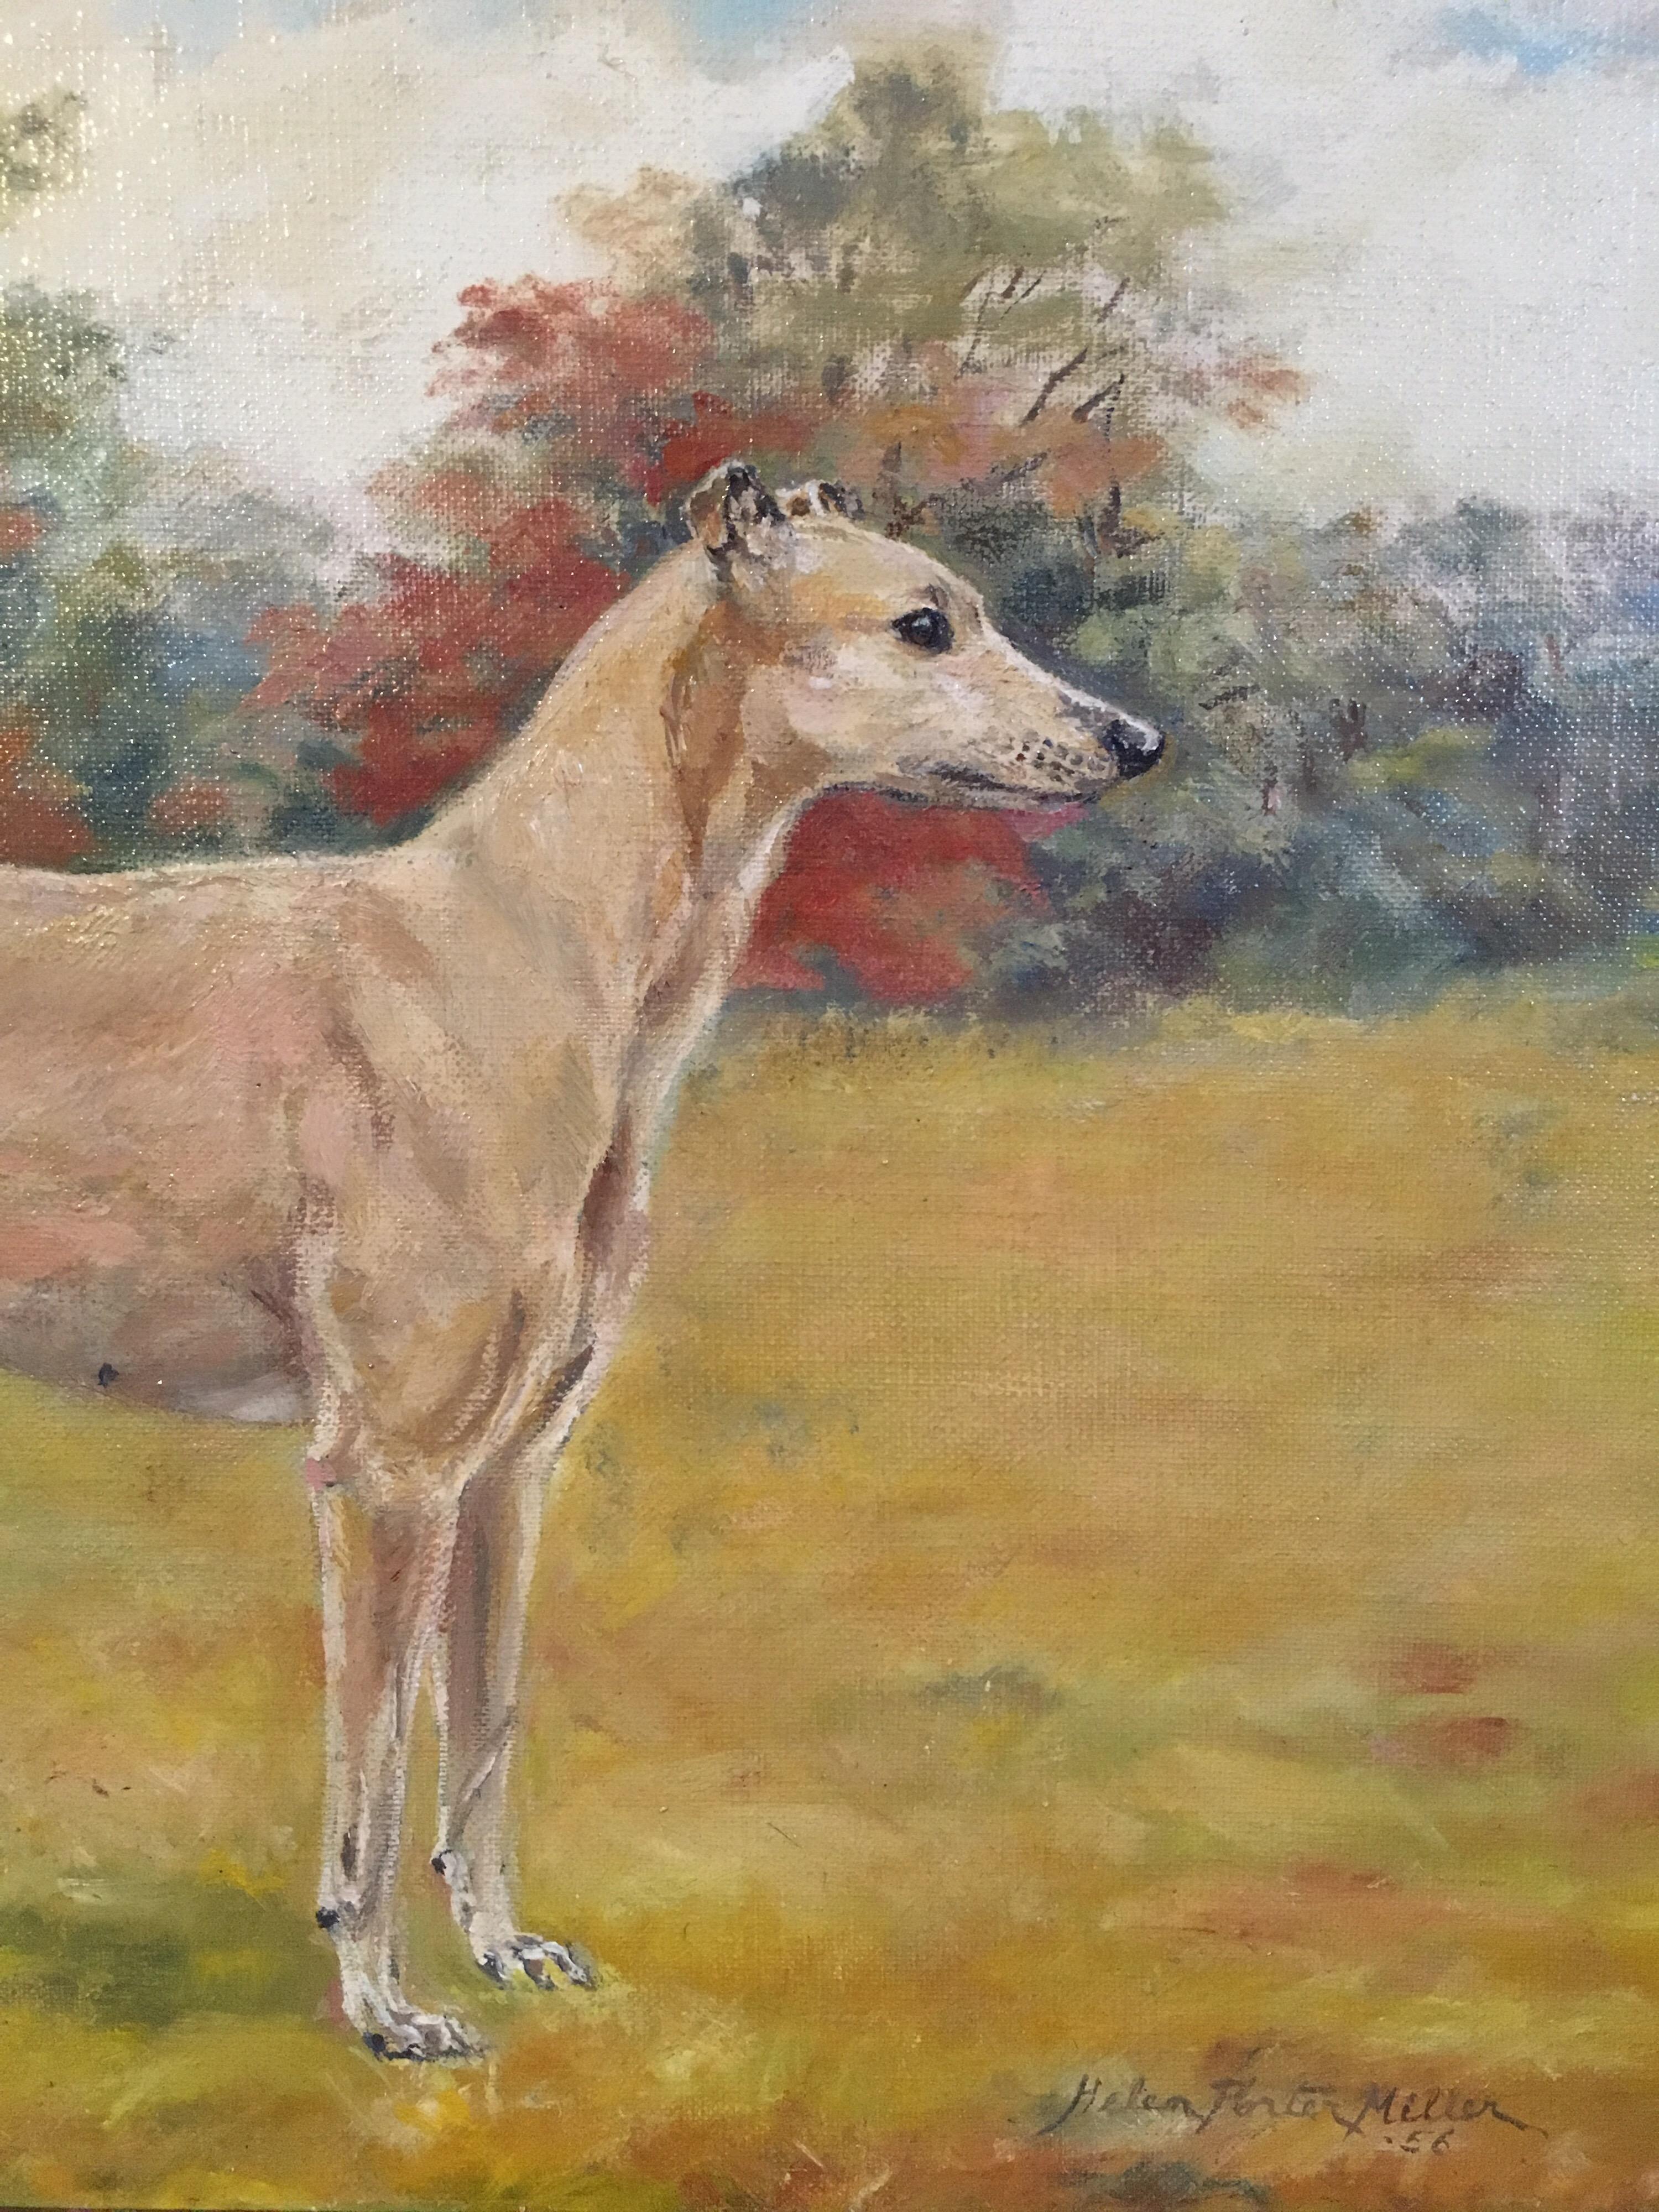 Whippet Dog Portrait 'Willeydon Harmony' Fine Impressionist Oil Painting, Signed
By British artist 'Helen Porter Millen' Mid 20th Century
Signed by the artist on the lower right hand corner, 
Titled verso
Oil painting on canvas, framed
Framed size: